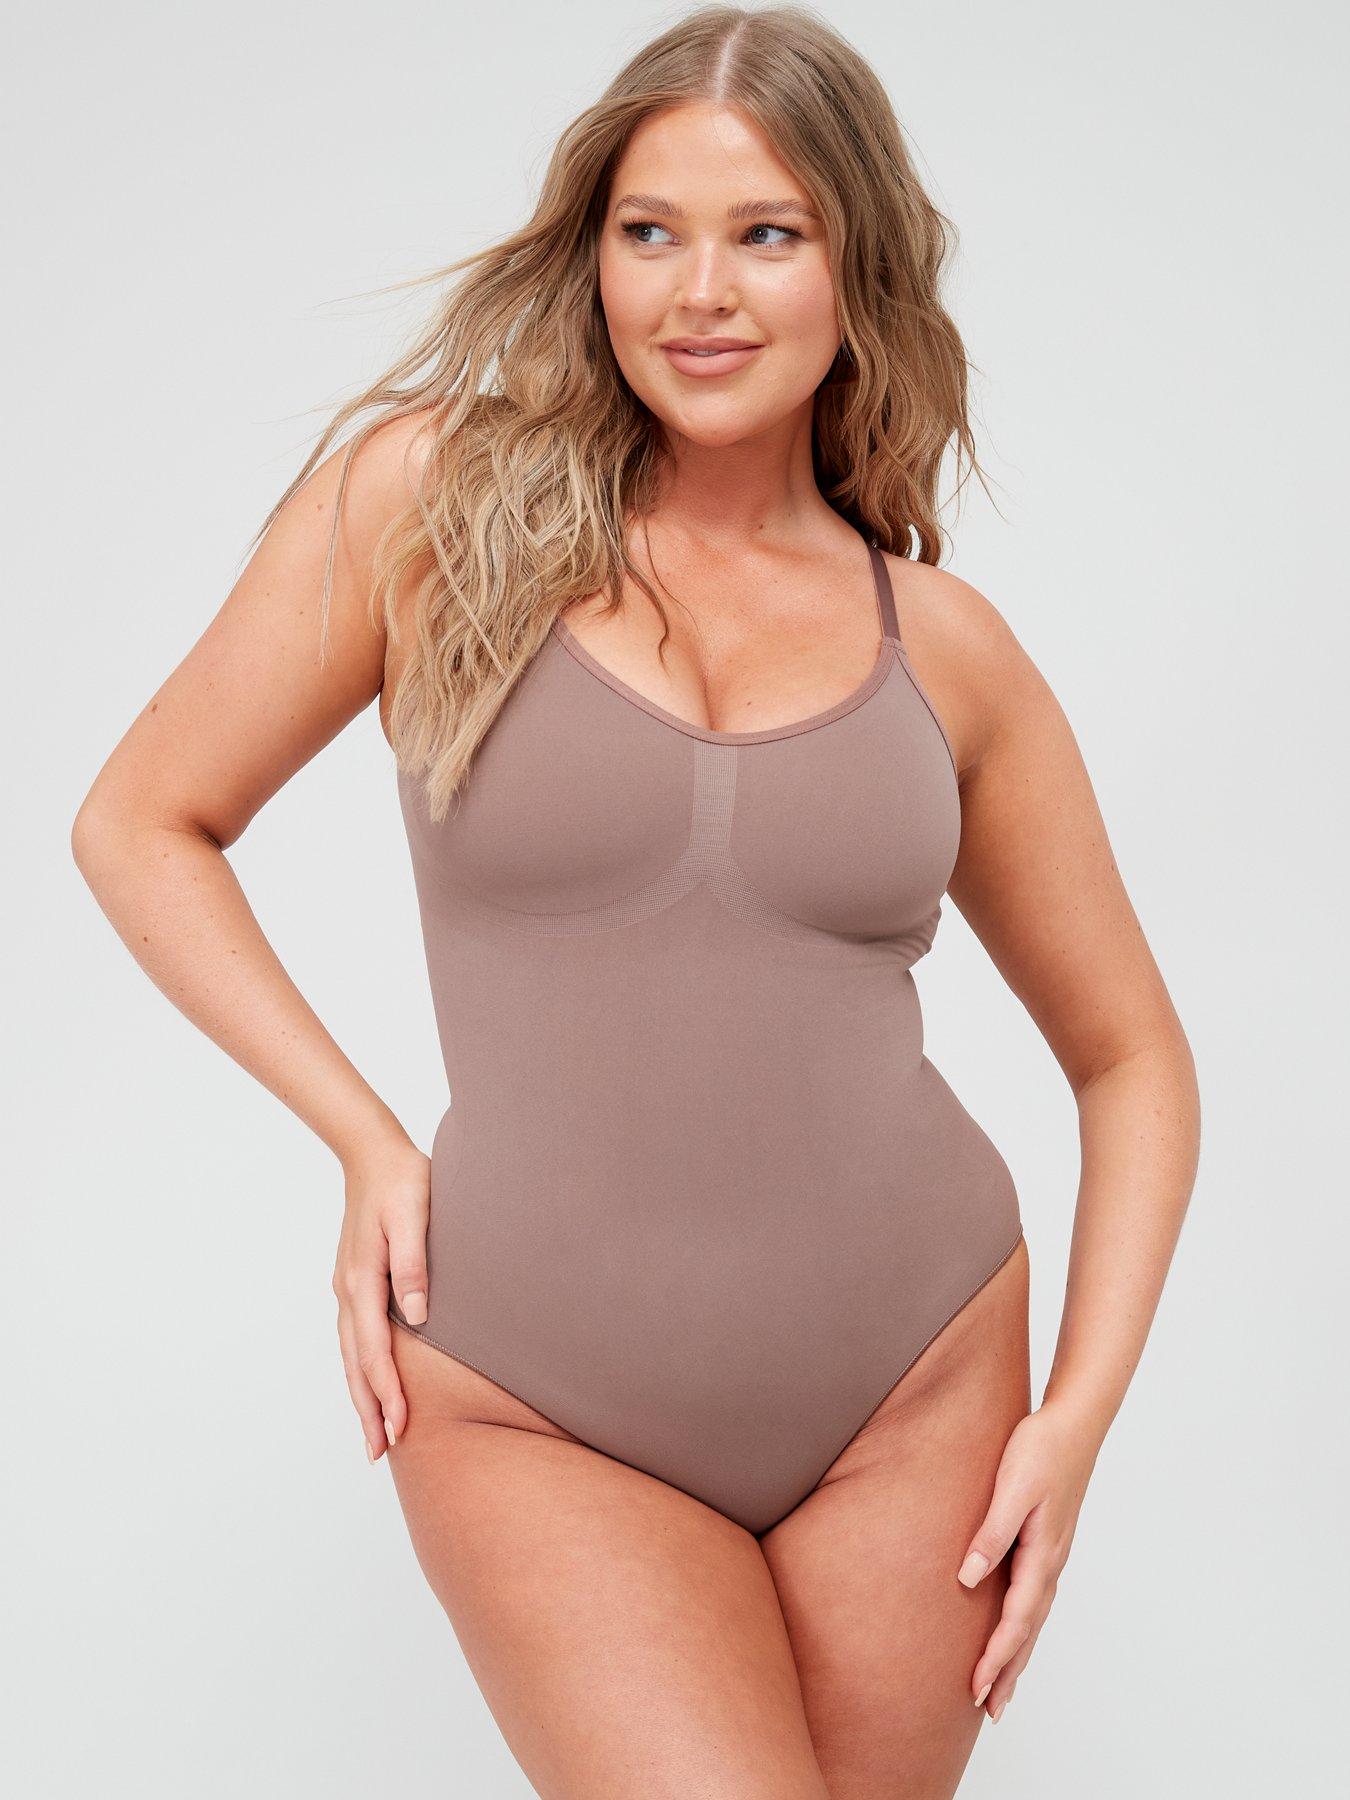 Shapewear bodysuit review on a size 8/10. The spanx version is not